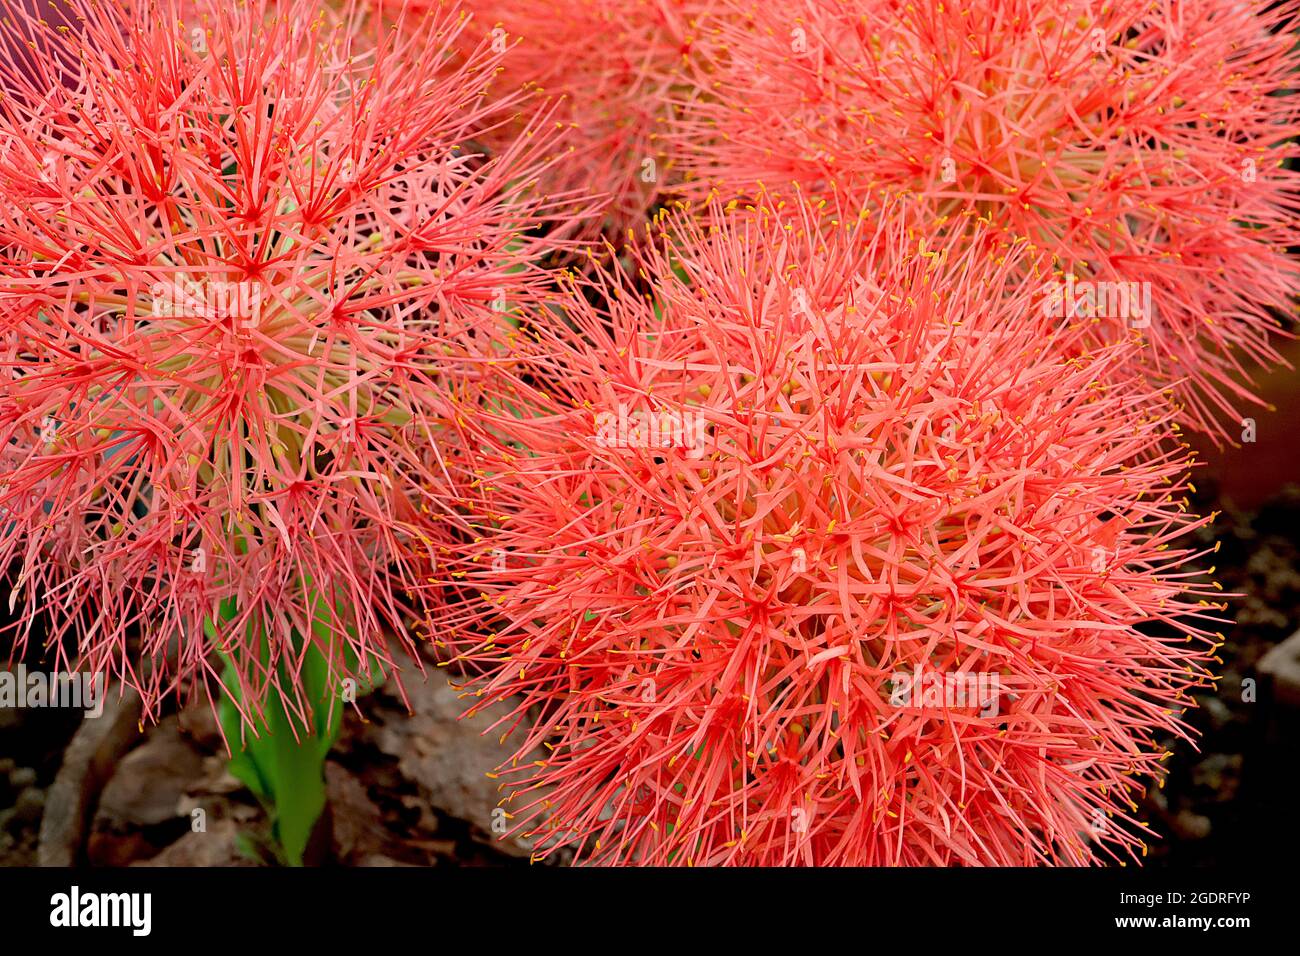 Scaxodus multiflorus blood lily – large spherical clusters of allium-like flowers with very narrow red orange petals on very thick stems,  July, UK Stock Photo